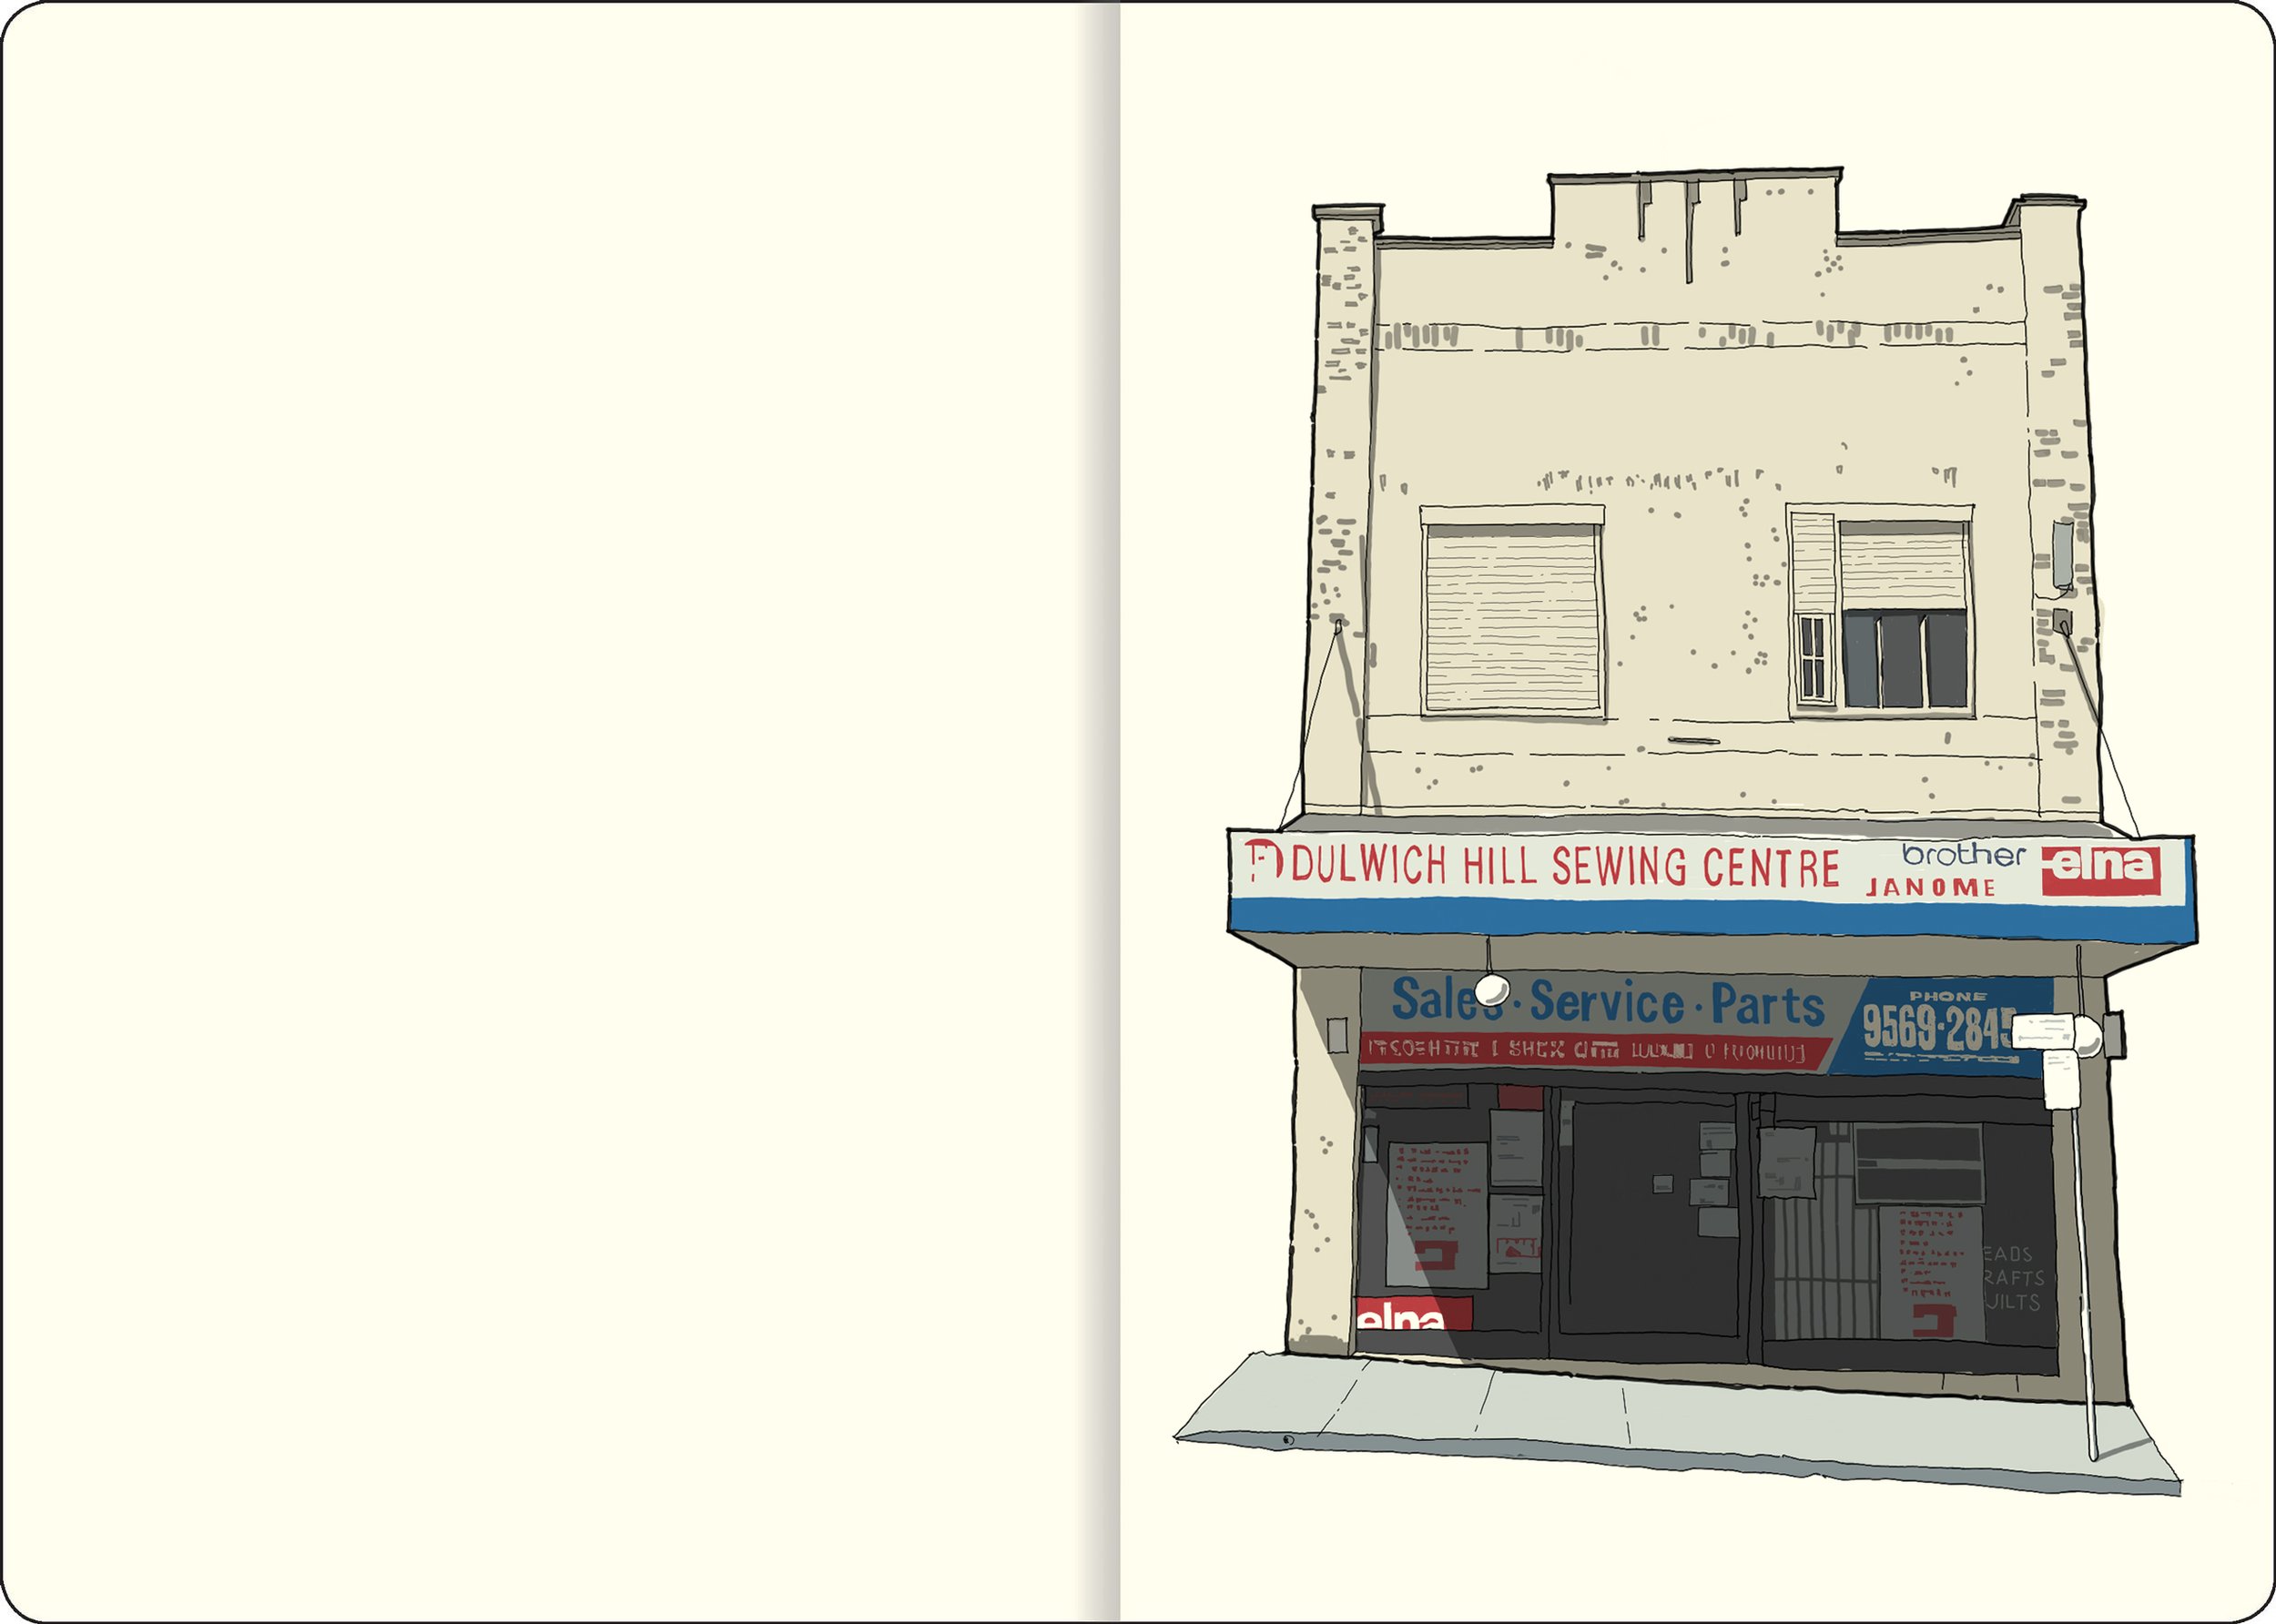 Sewing Centre / Dulwich Hill